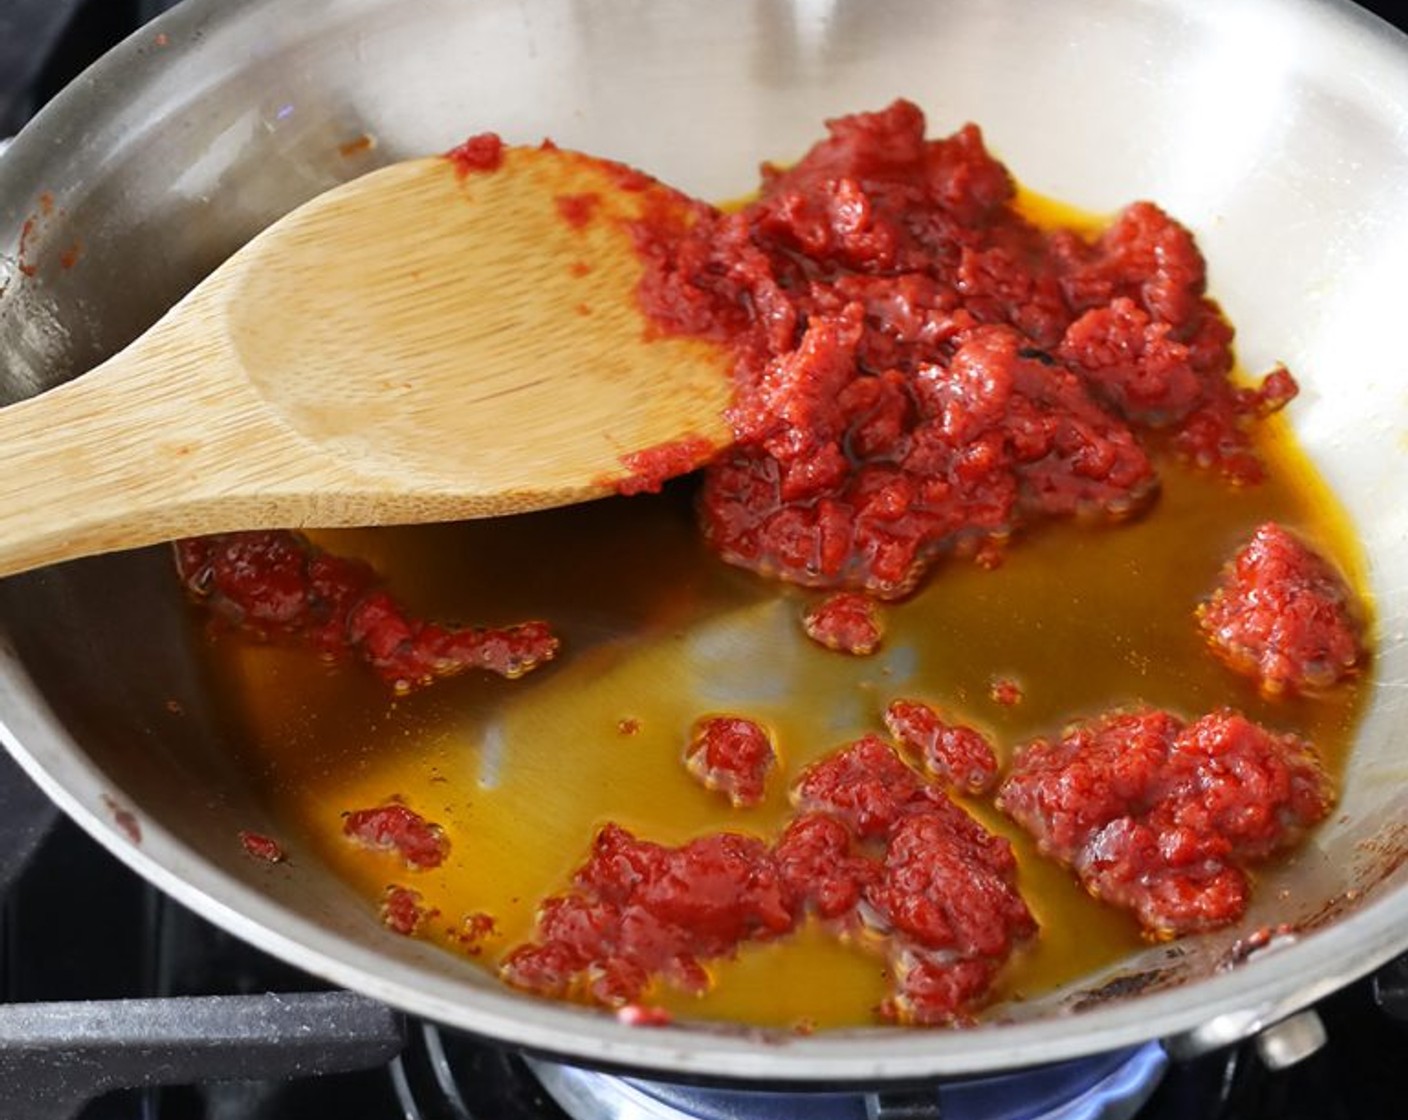 step 2 Cook, breaking up the tomato paste with a wooden spoon and scraping the bottom of the skillet until the oil is bright orange and the tomato paste has darkened in color, 2-3 minutes. Set aside to cool slightly.